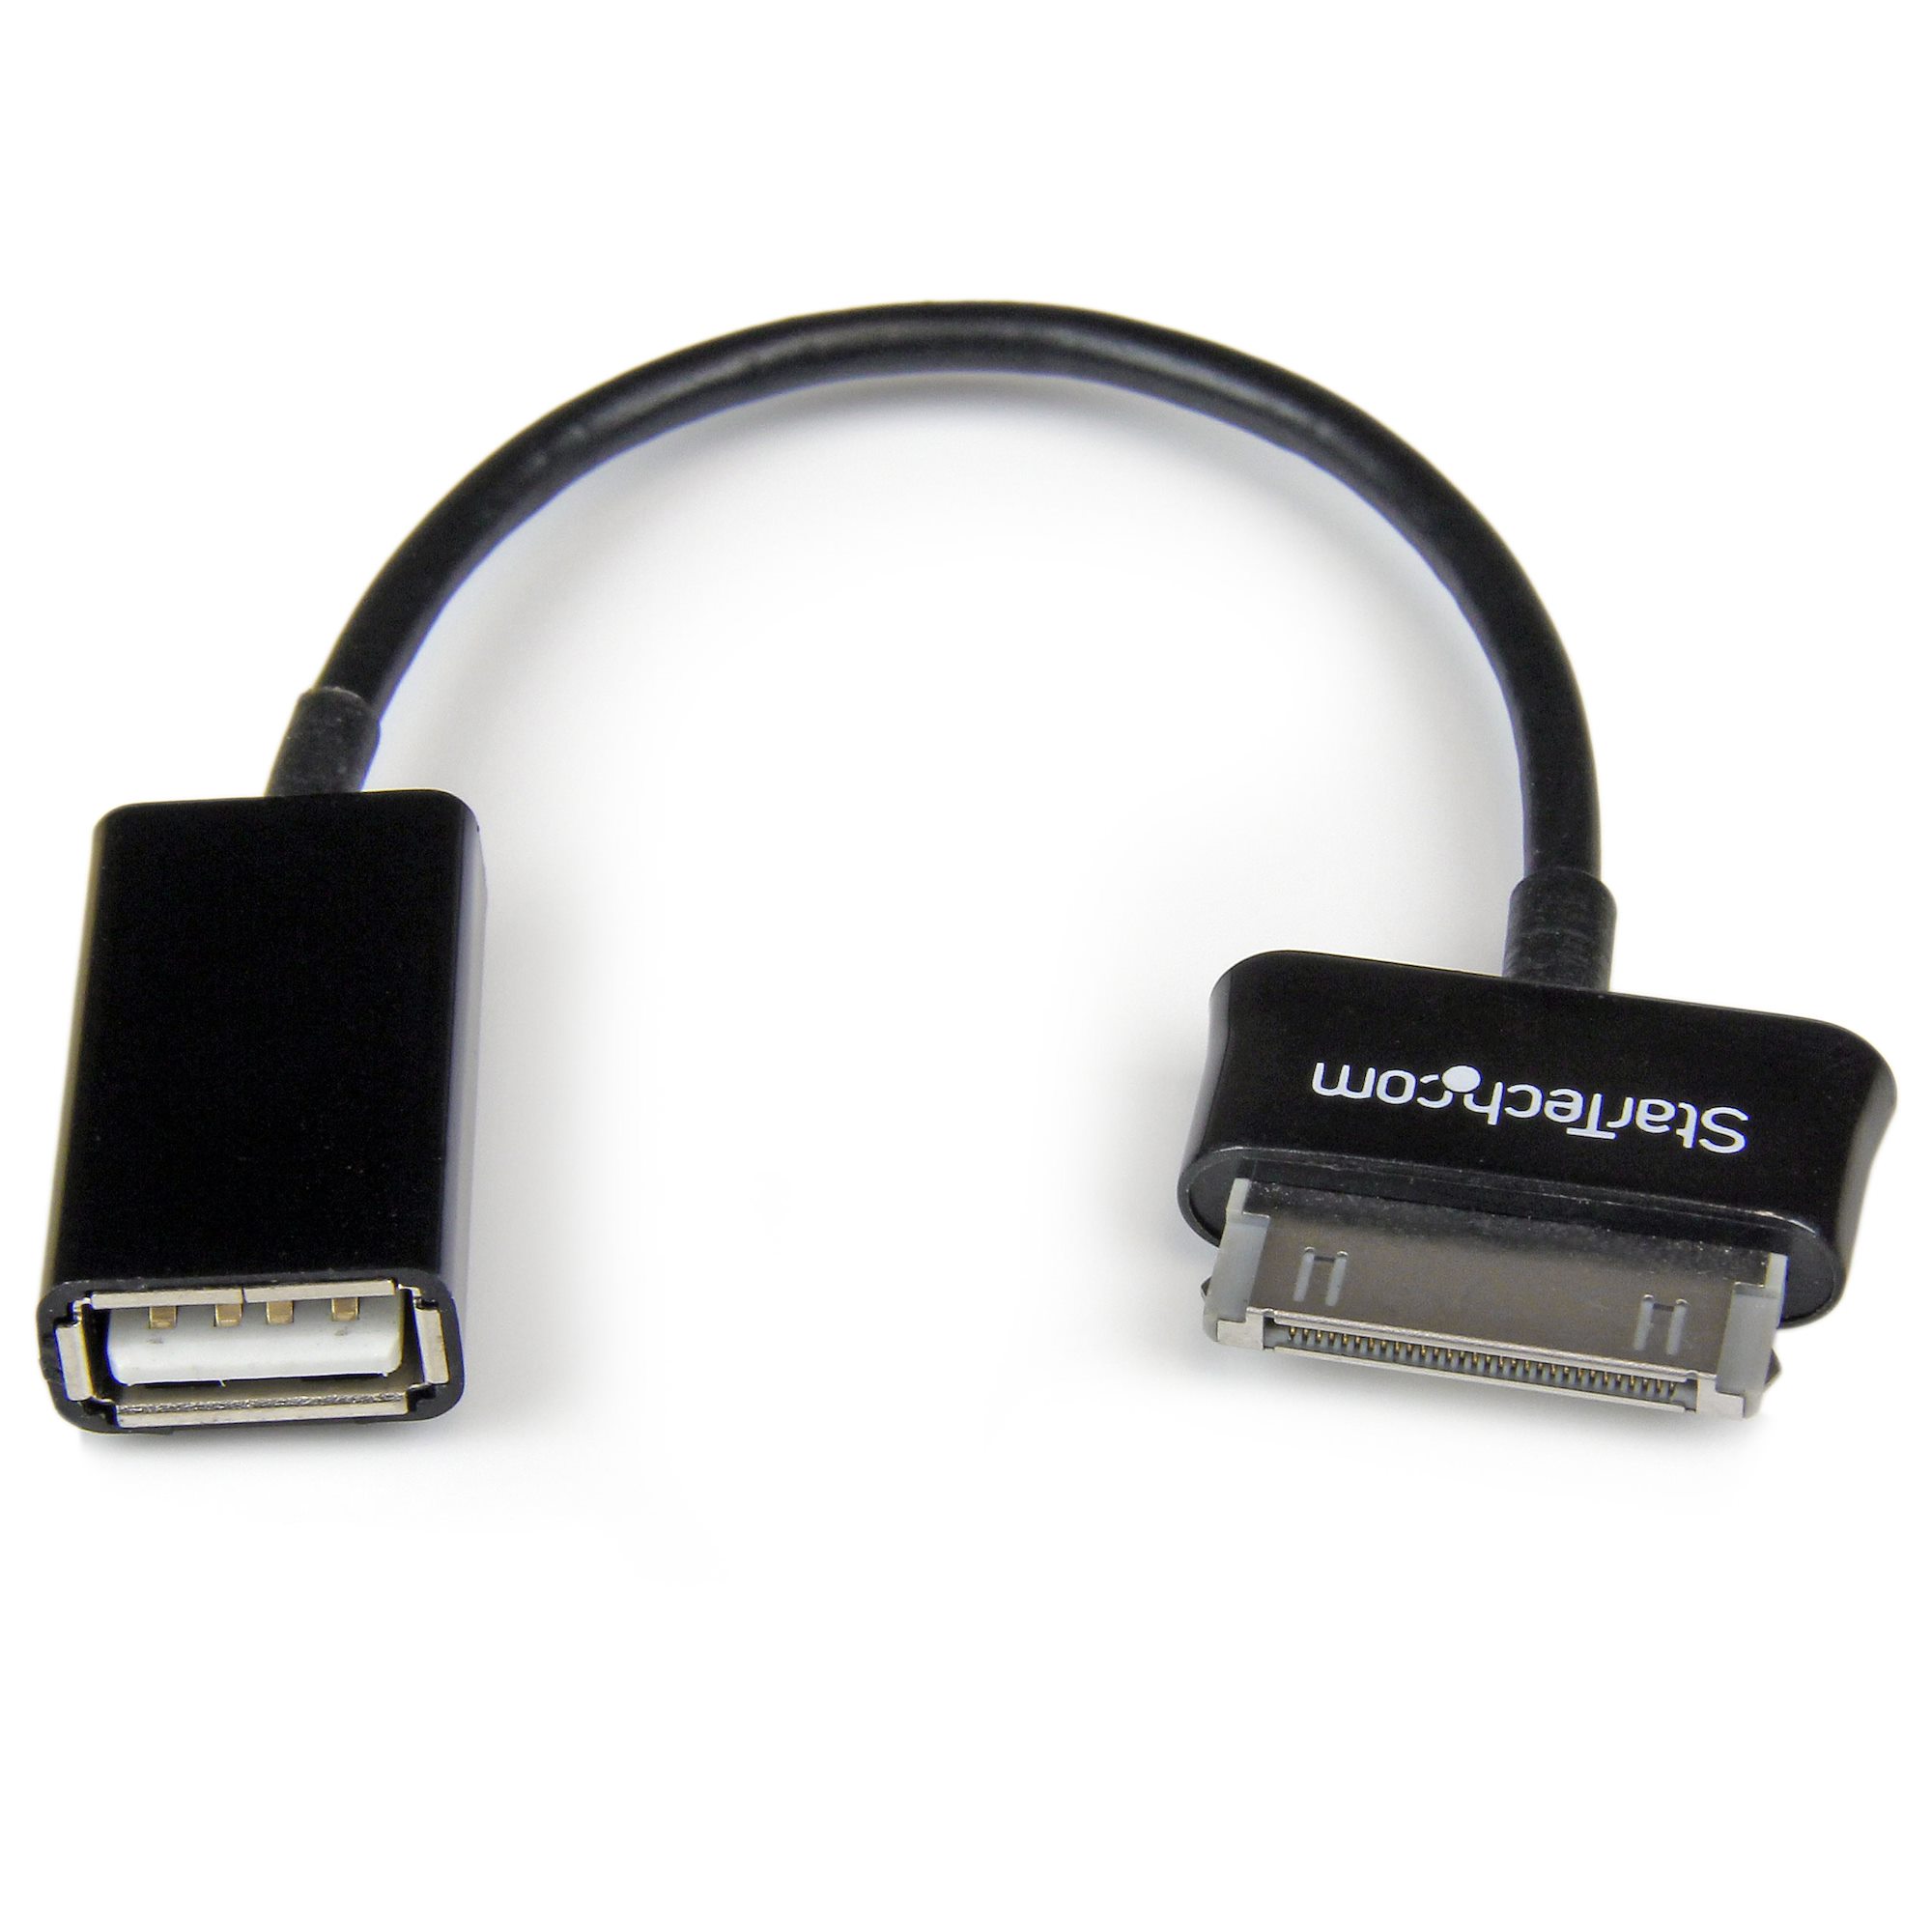 Samsung Galaxy Tab™ USB Adapter Cable - USB Adapters (USB 2.0), Cables